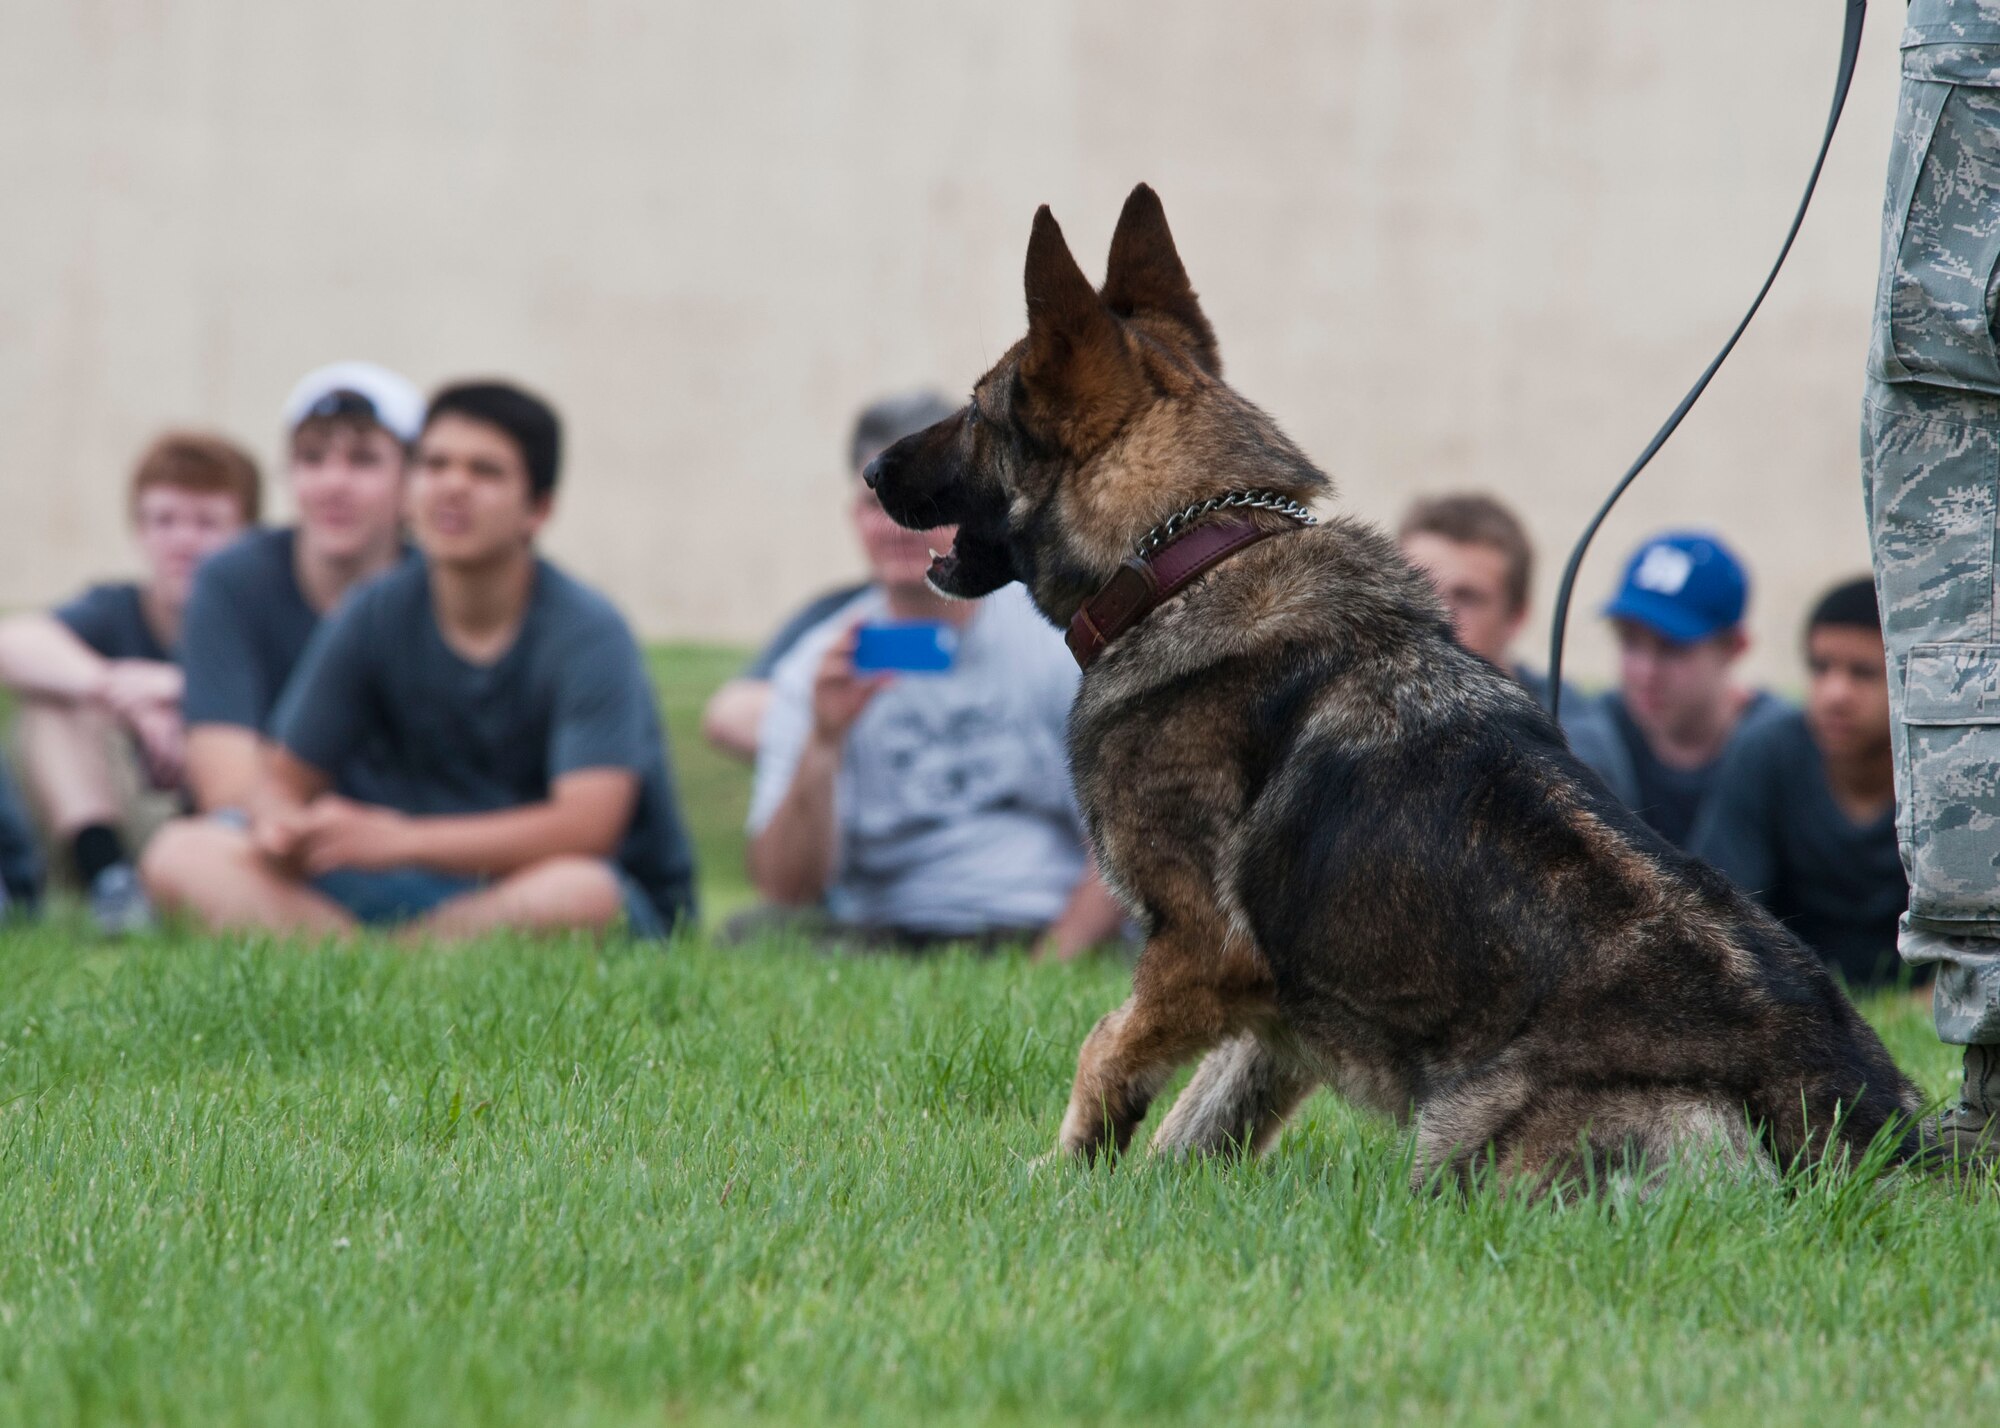 YOKOTA AIR BASE, Japan – A military working dog keeps its eyes on the target at Yokota Air Base, Japan, June 18, 2013.  Boy Scouts visiting Yokota had their chance to see the MWD demonstration and ask questions about the K-9 and military police career field. (U.S. Air Force photo by Airman 1st Class Soo C. Kim)